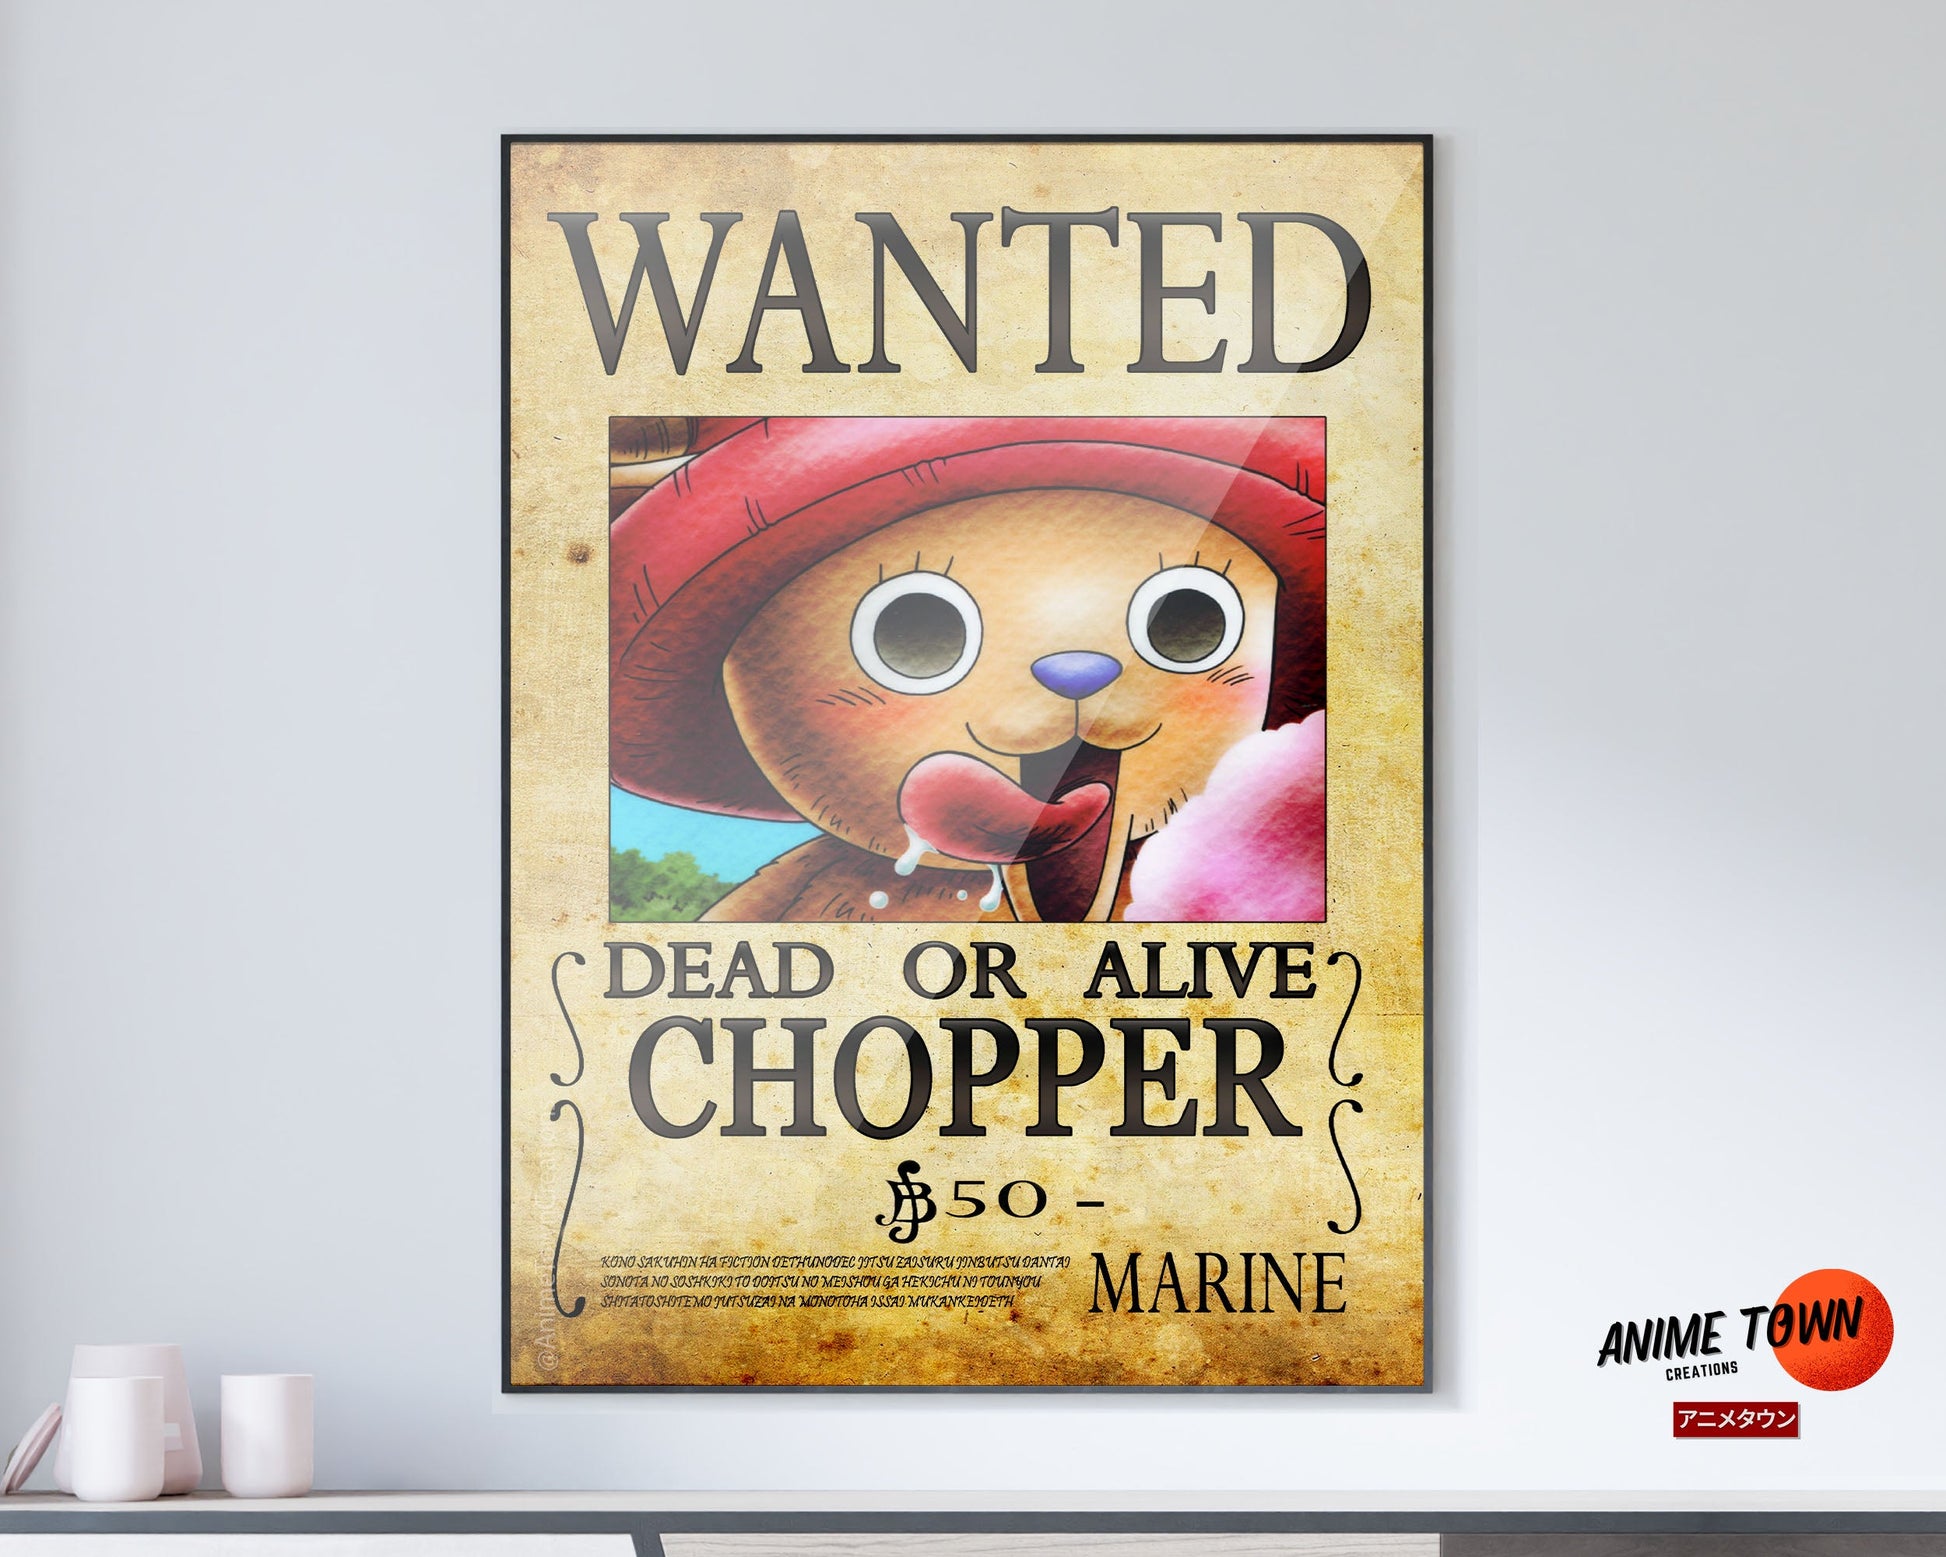 Chopper's low bounty makes absolutely no sense. (One Piece) Anime